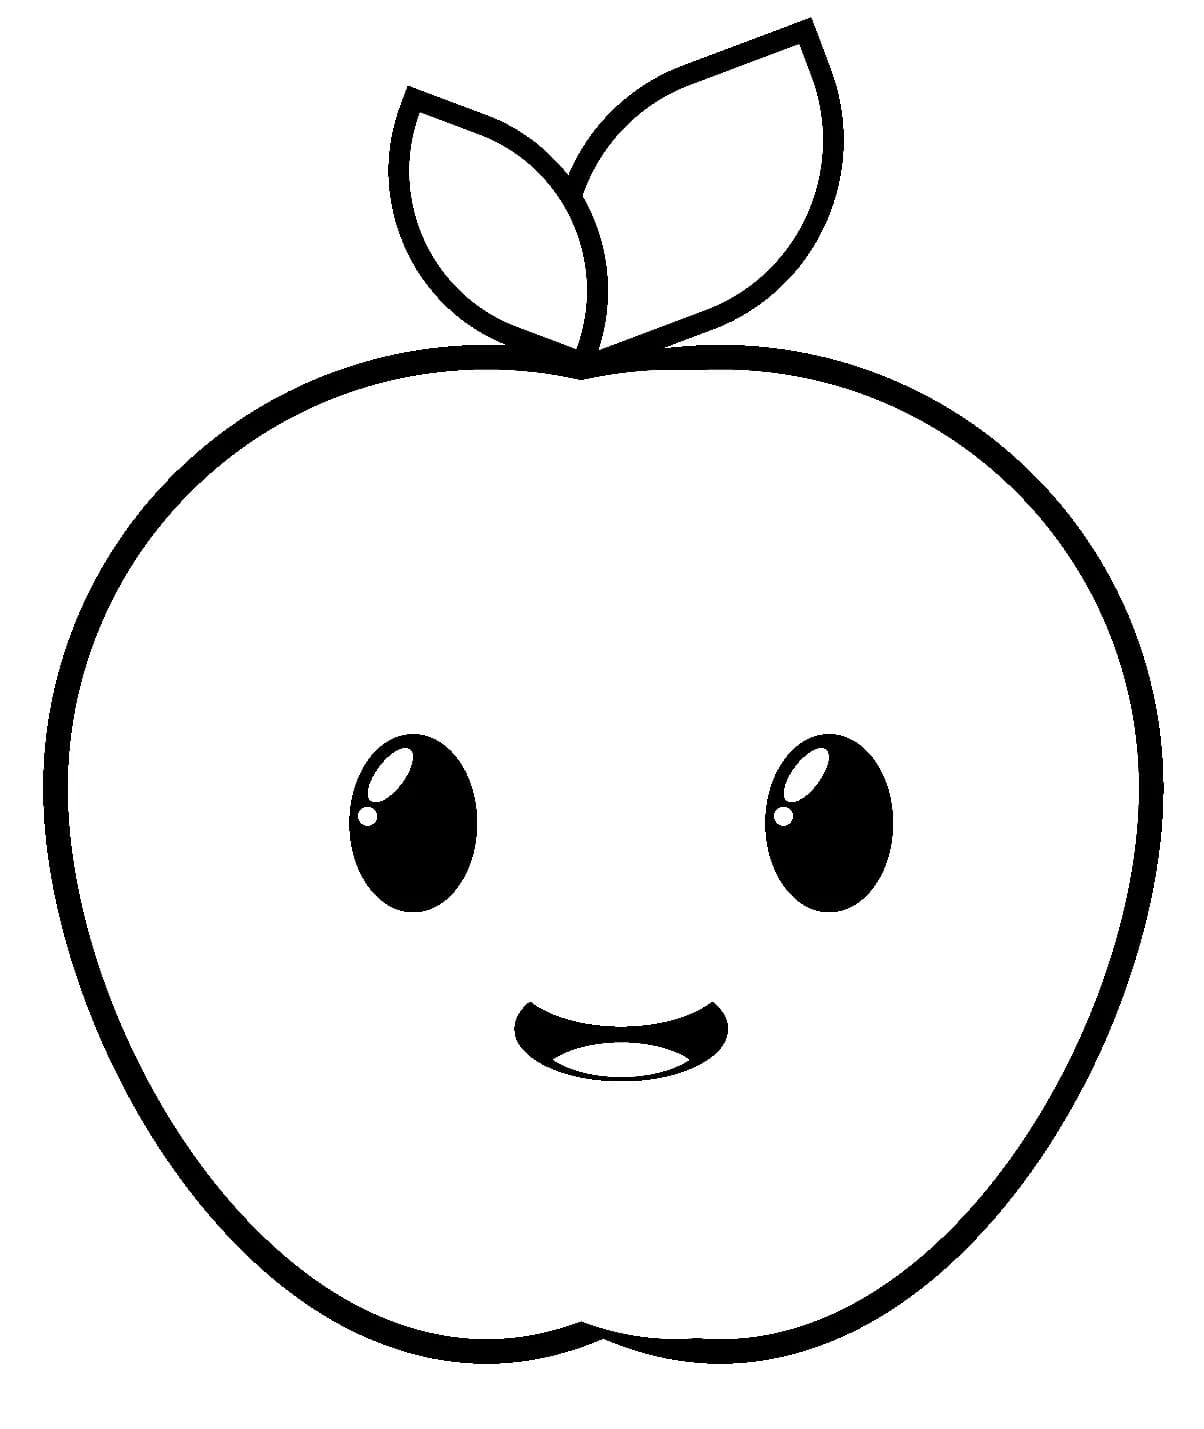 Red Apple Vector Drawing Isolated On White Background Cartoon Doodle Of Cute  Colorful Illustrations Funny Works Of Art Handdrawn Sketch Logo Design  Symbol Emblem Sticker Stock Illustration - Download Image Now - iStock